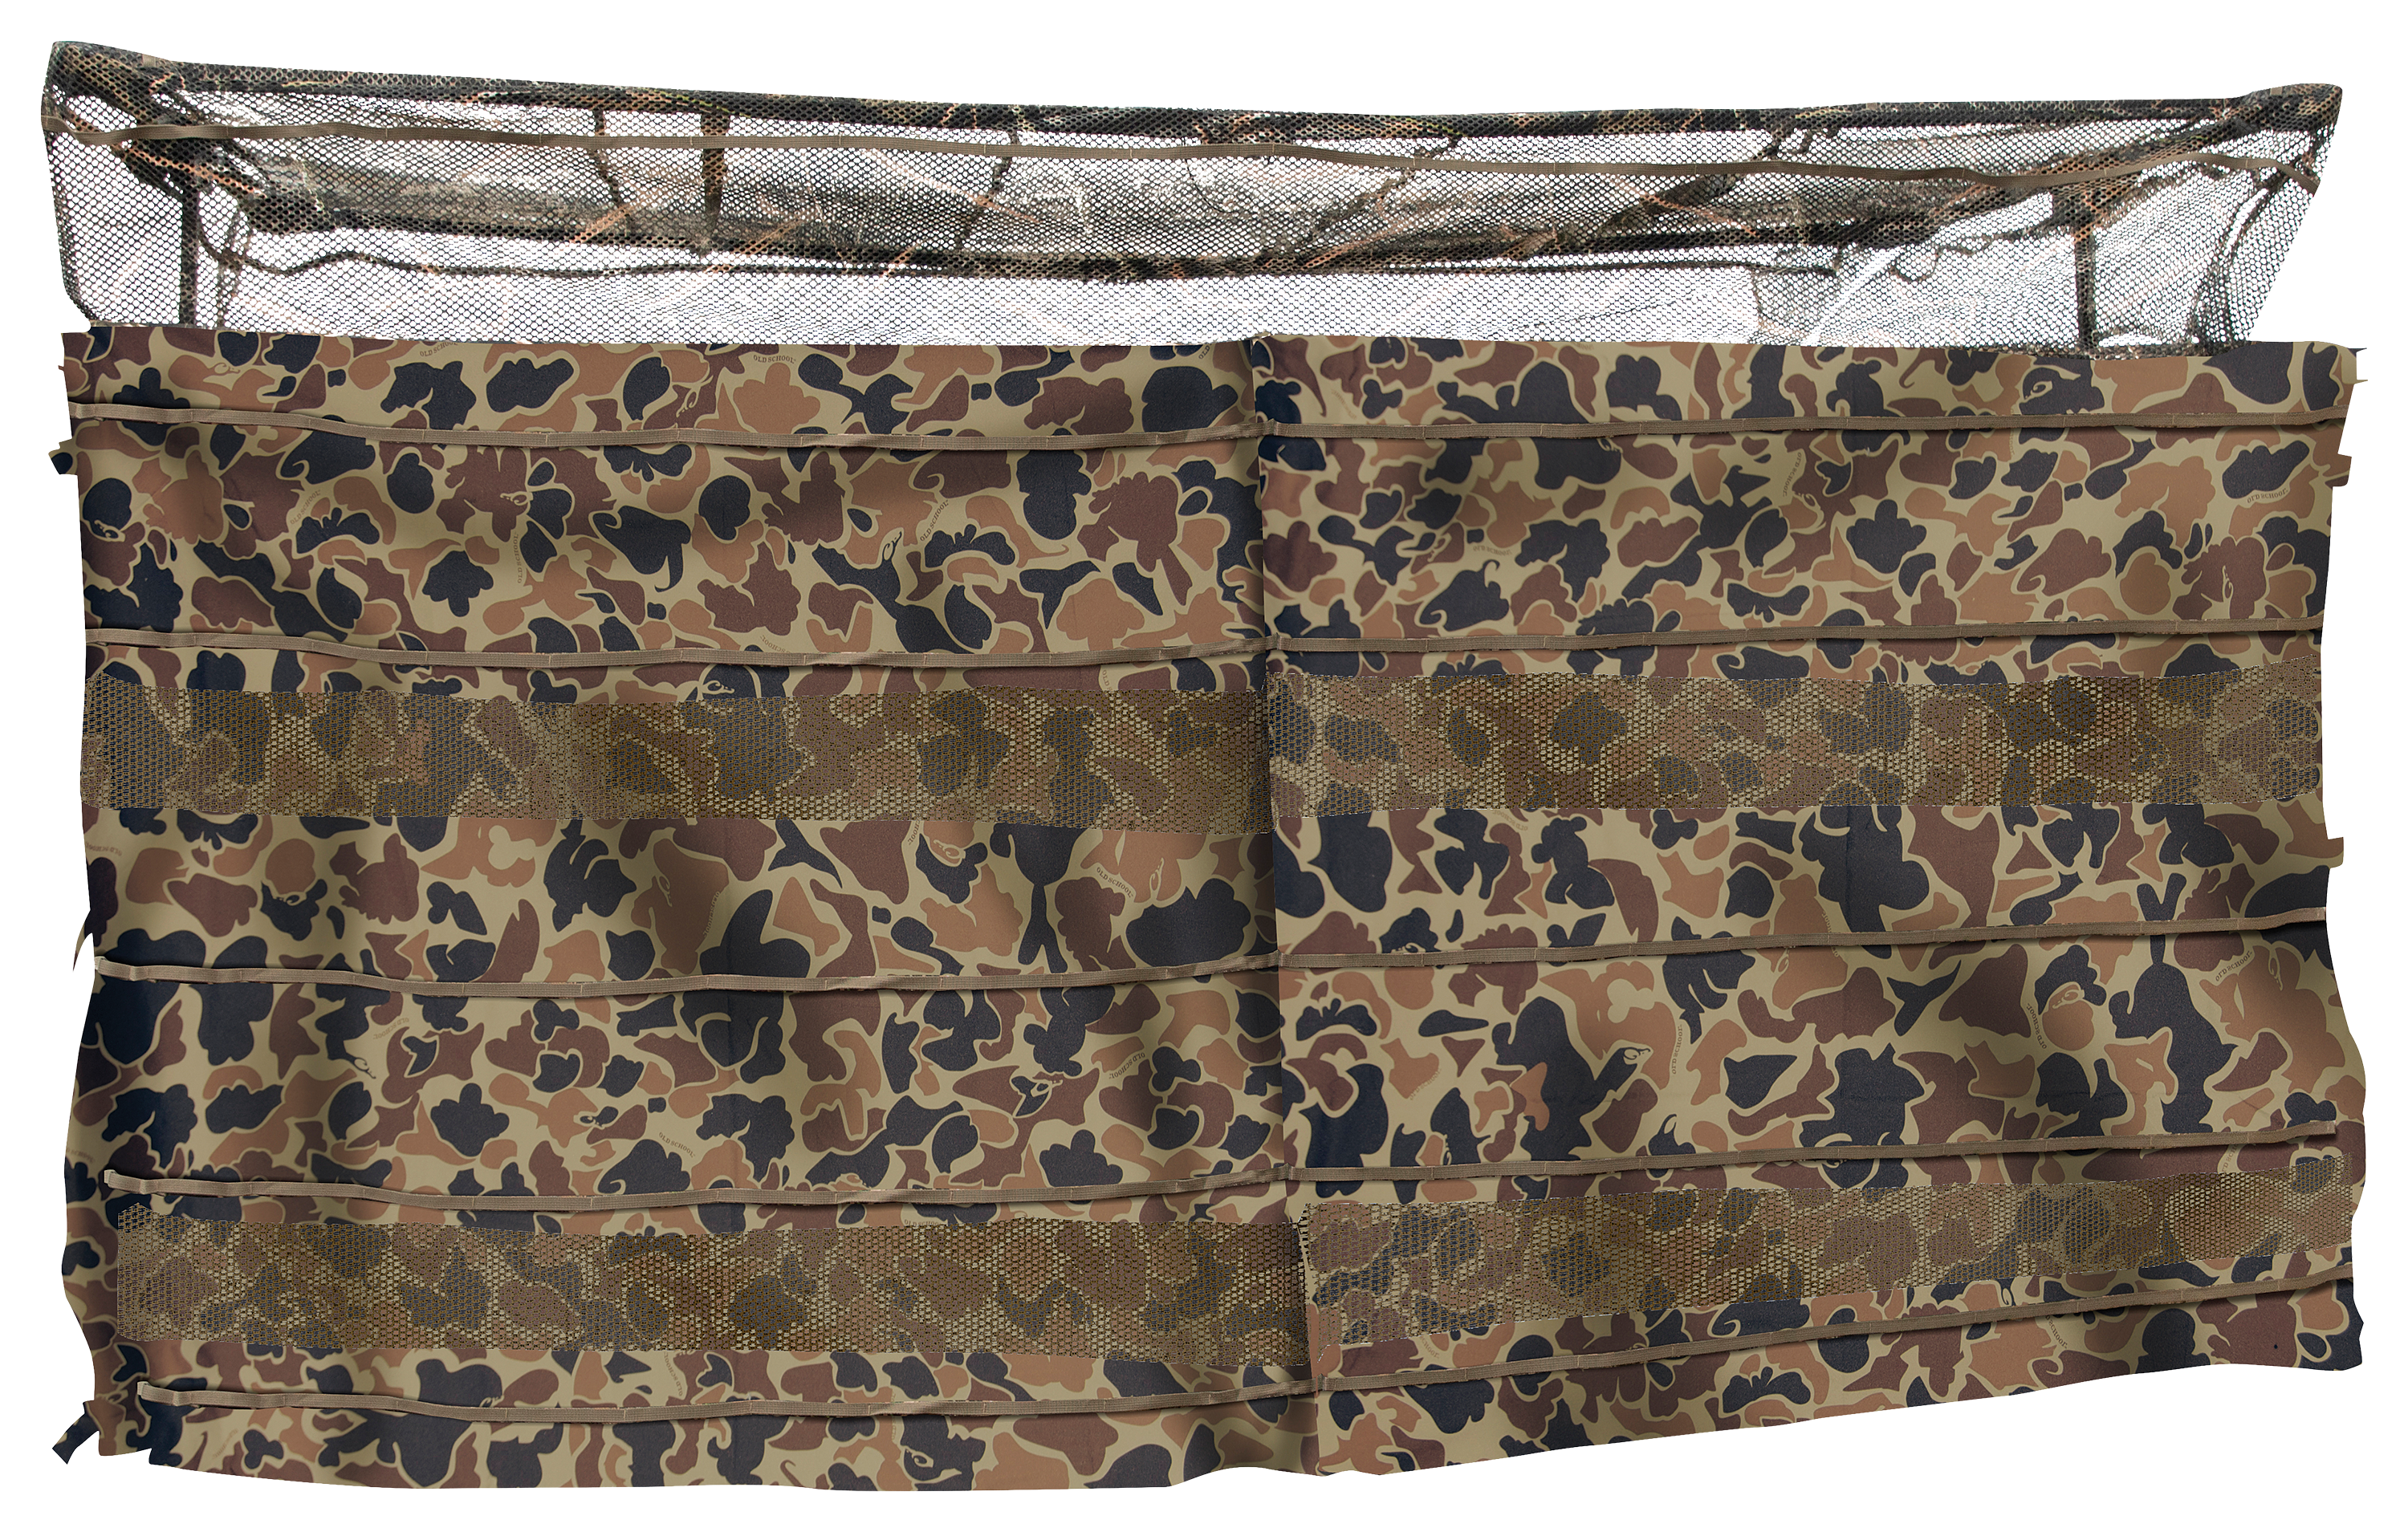 Drake Waterfowl Ghillie Boat Blind with No Shadow Dual Action Top - Old School Camo